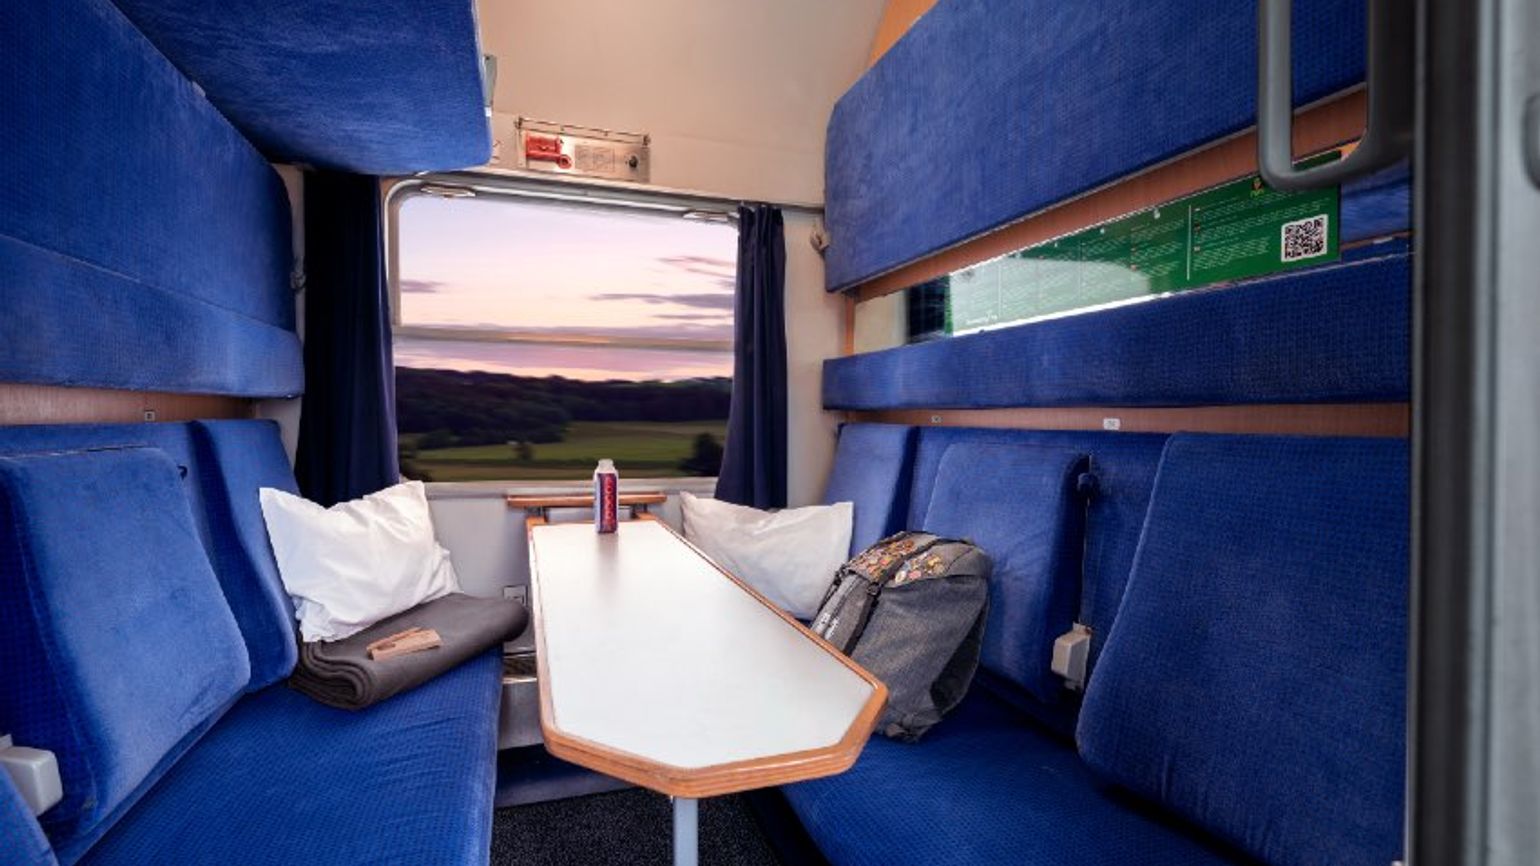 European Sleeper train launches extended route to Prague